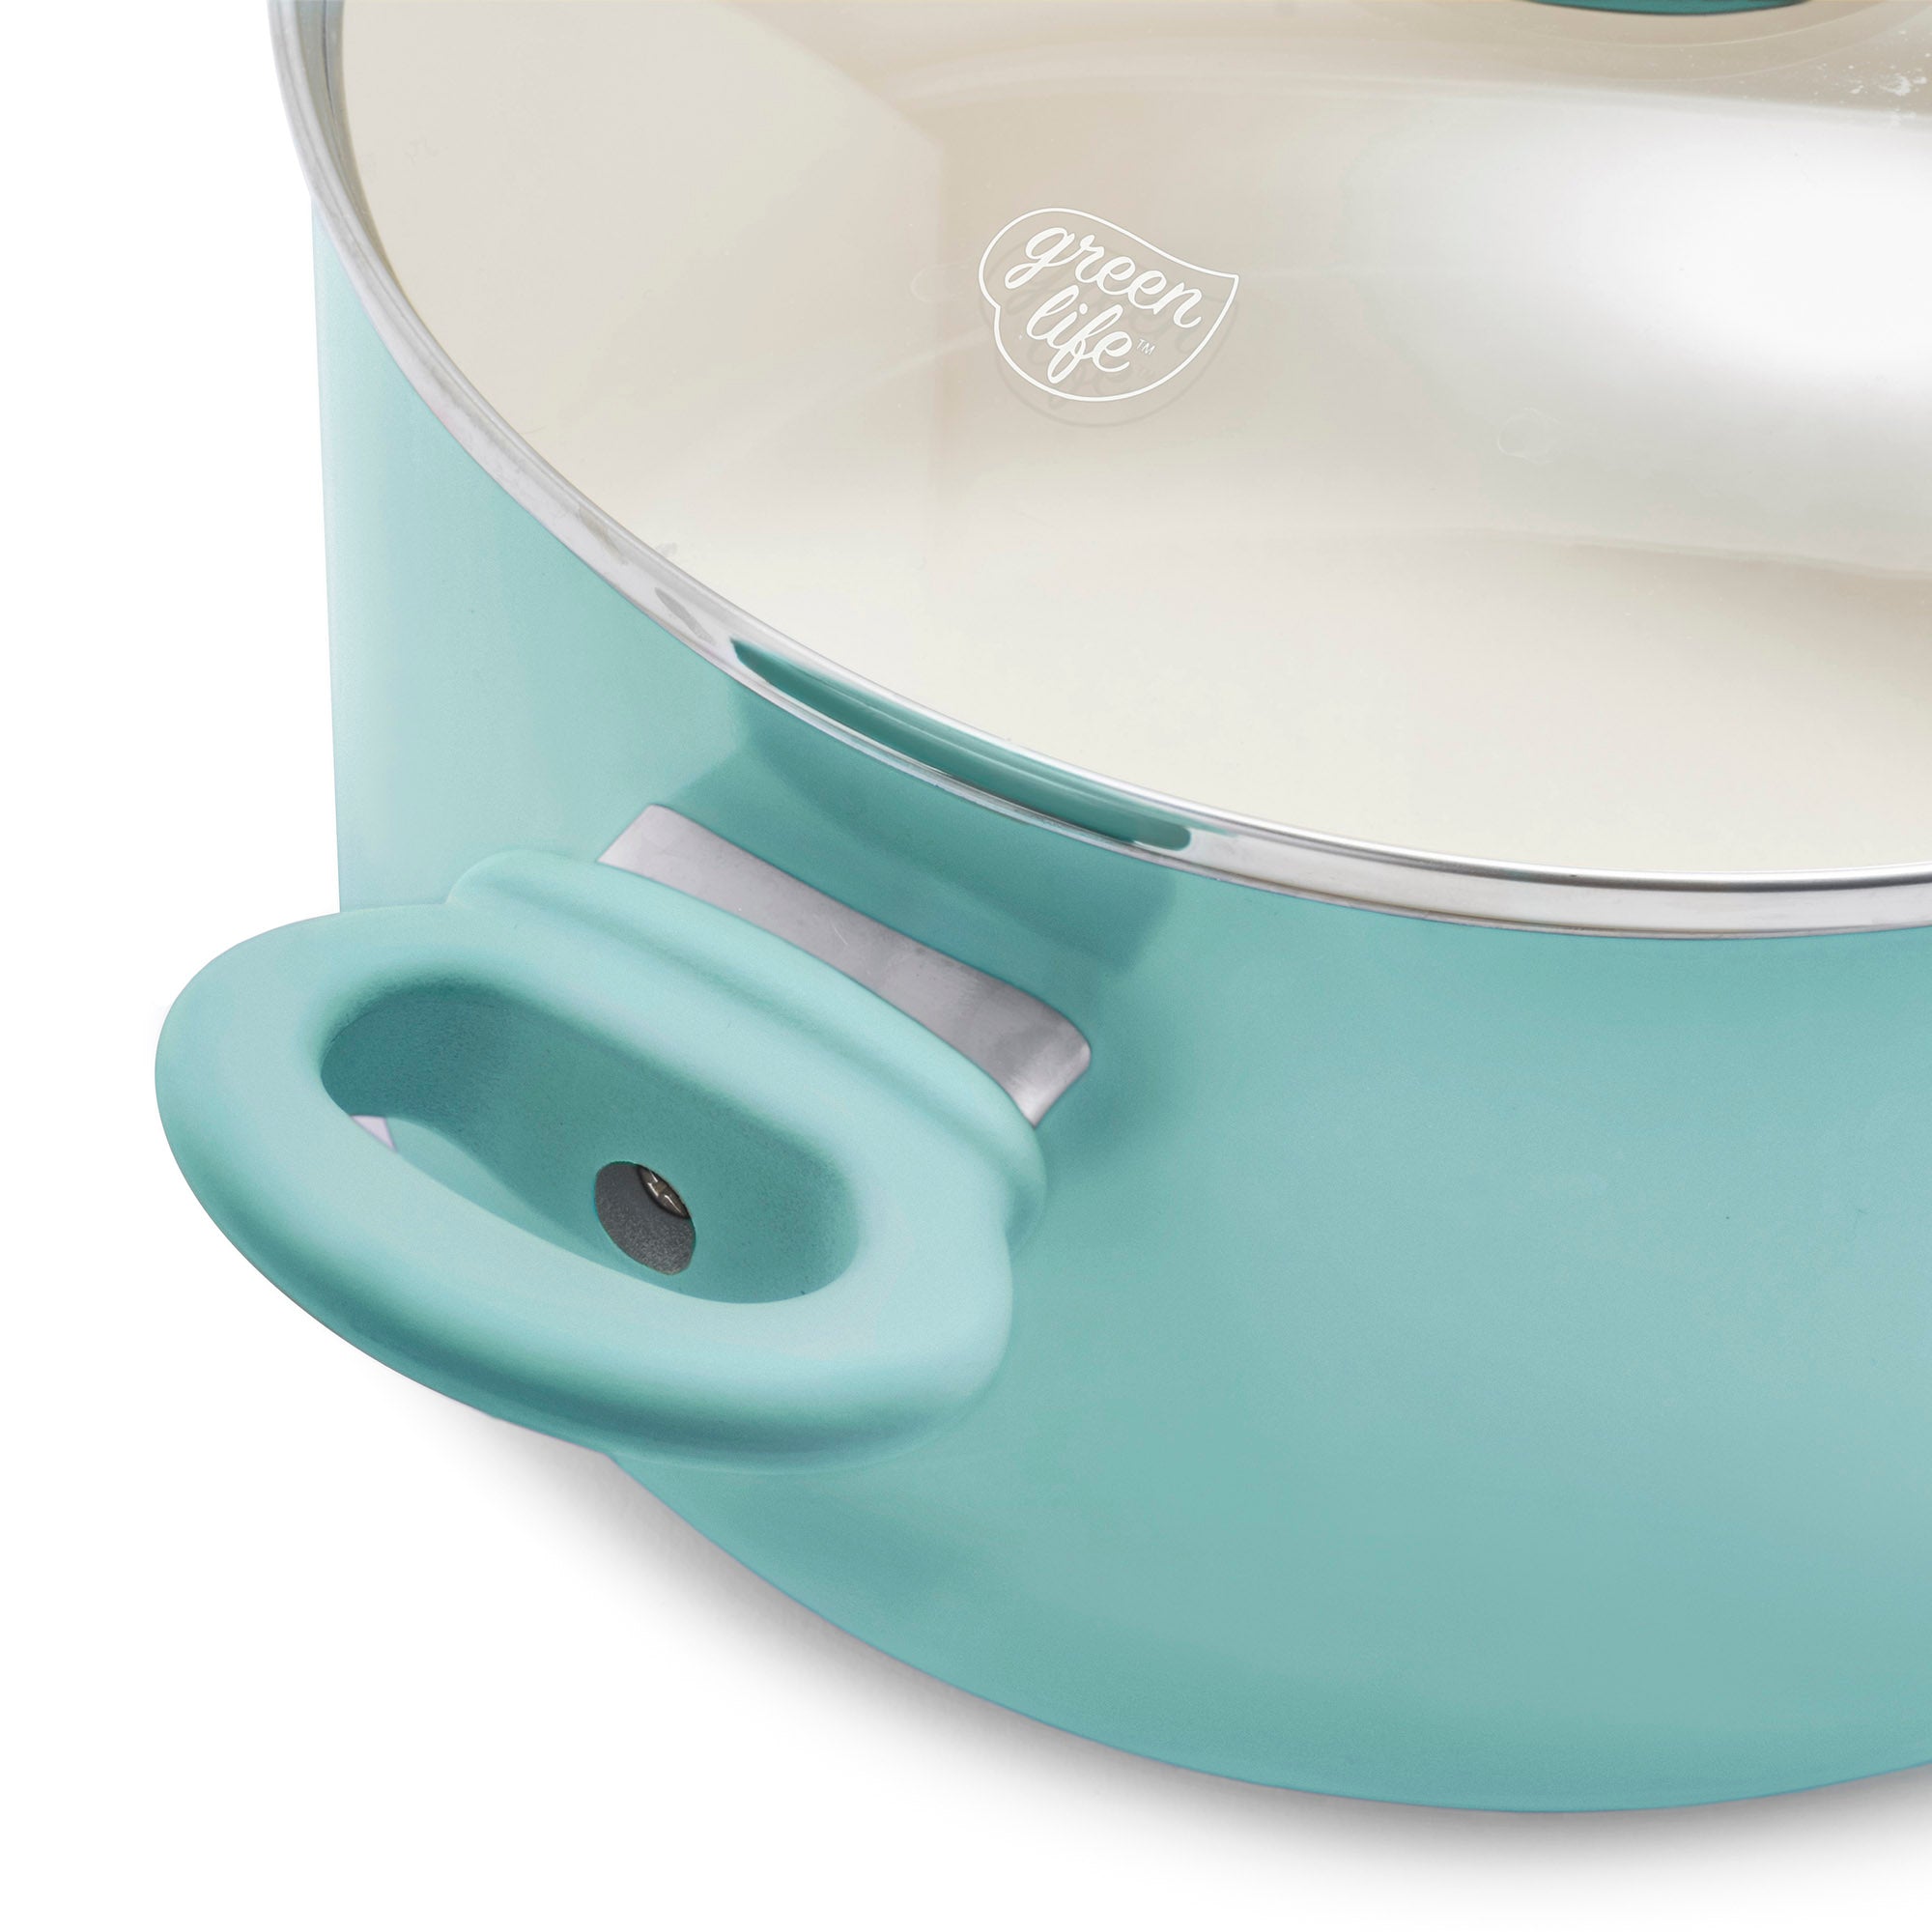 The Cookware Company Design Team create the Greenlife Artisan collection  hoping to make every meal a little easier, healthier, and a little better -  Global Design News